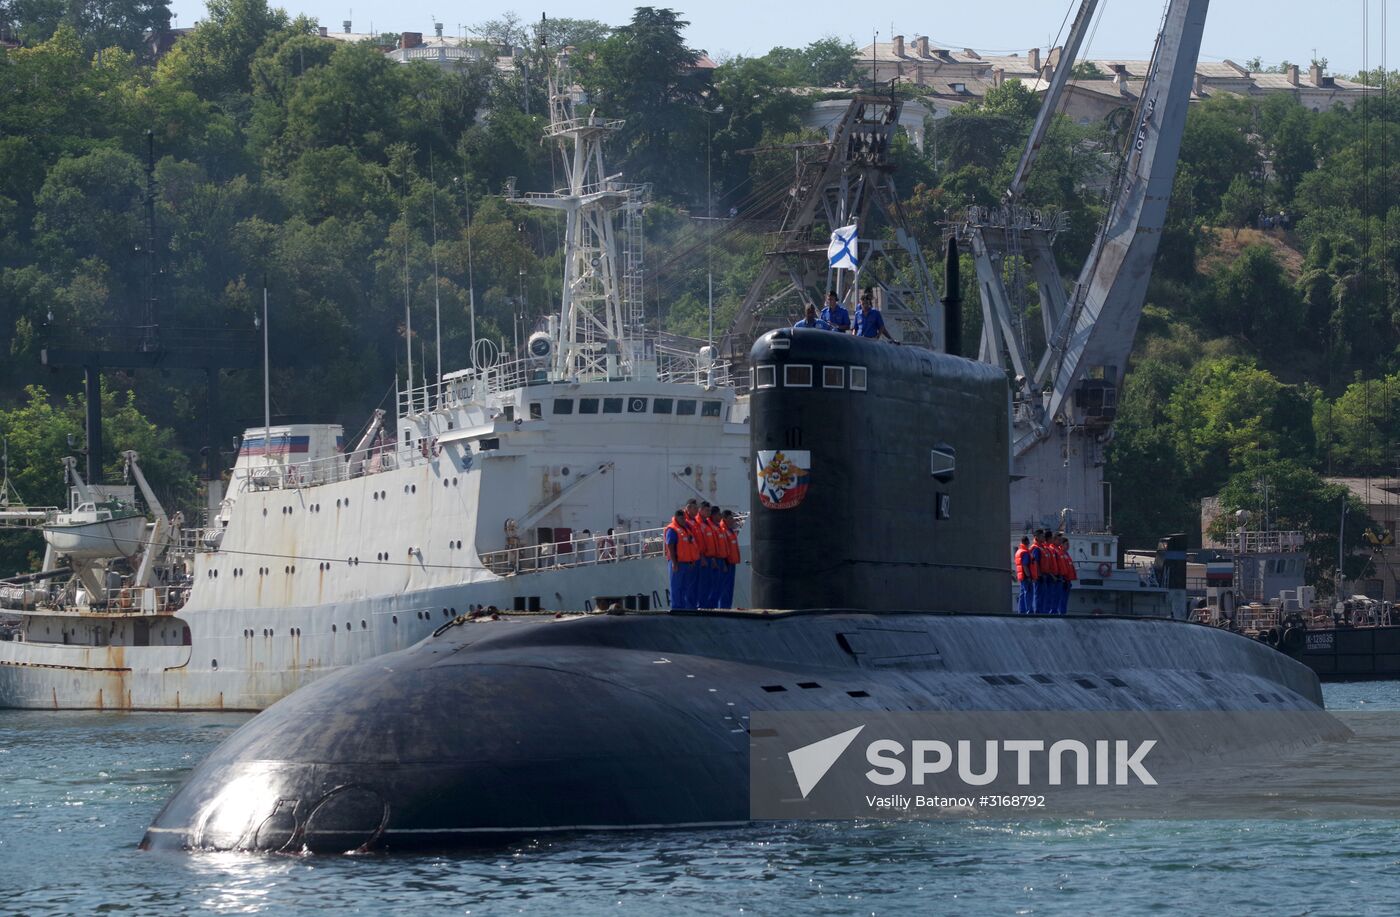 Welcoming ceremony for Krasnodar newly launched diesel submarine in Sevastopol